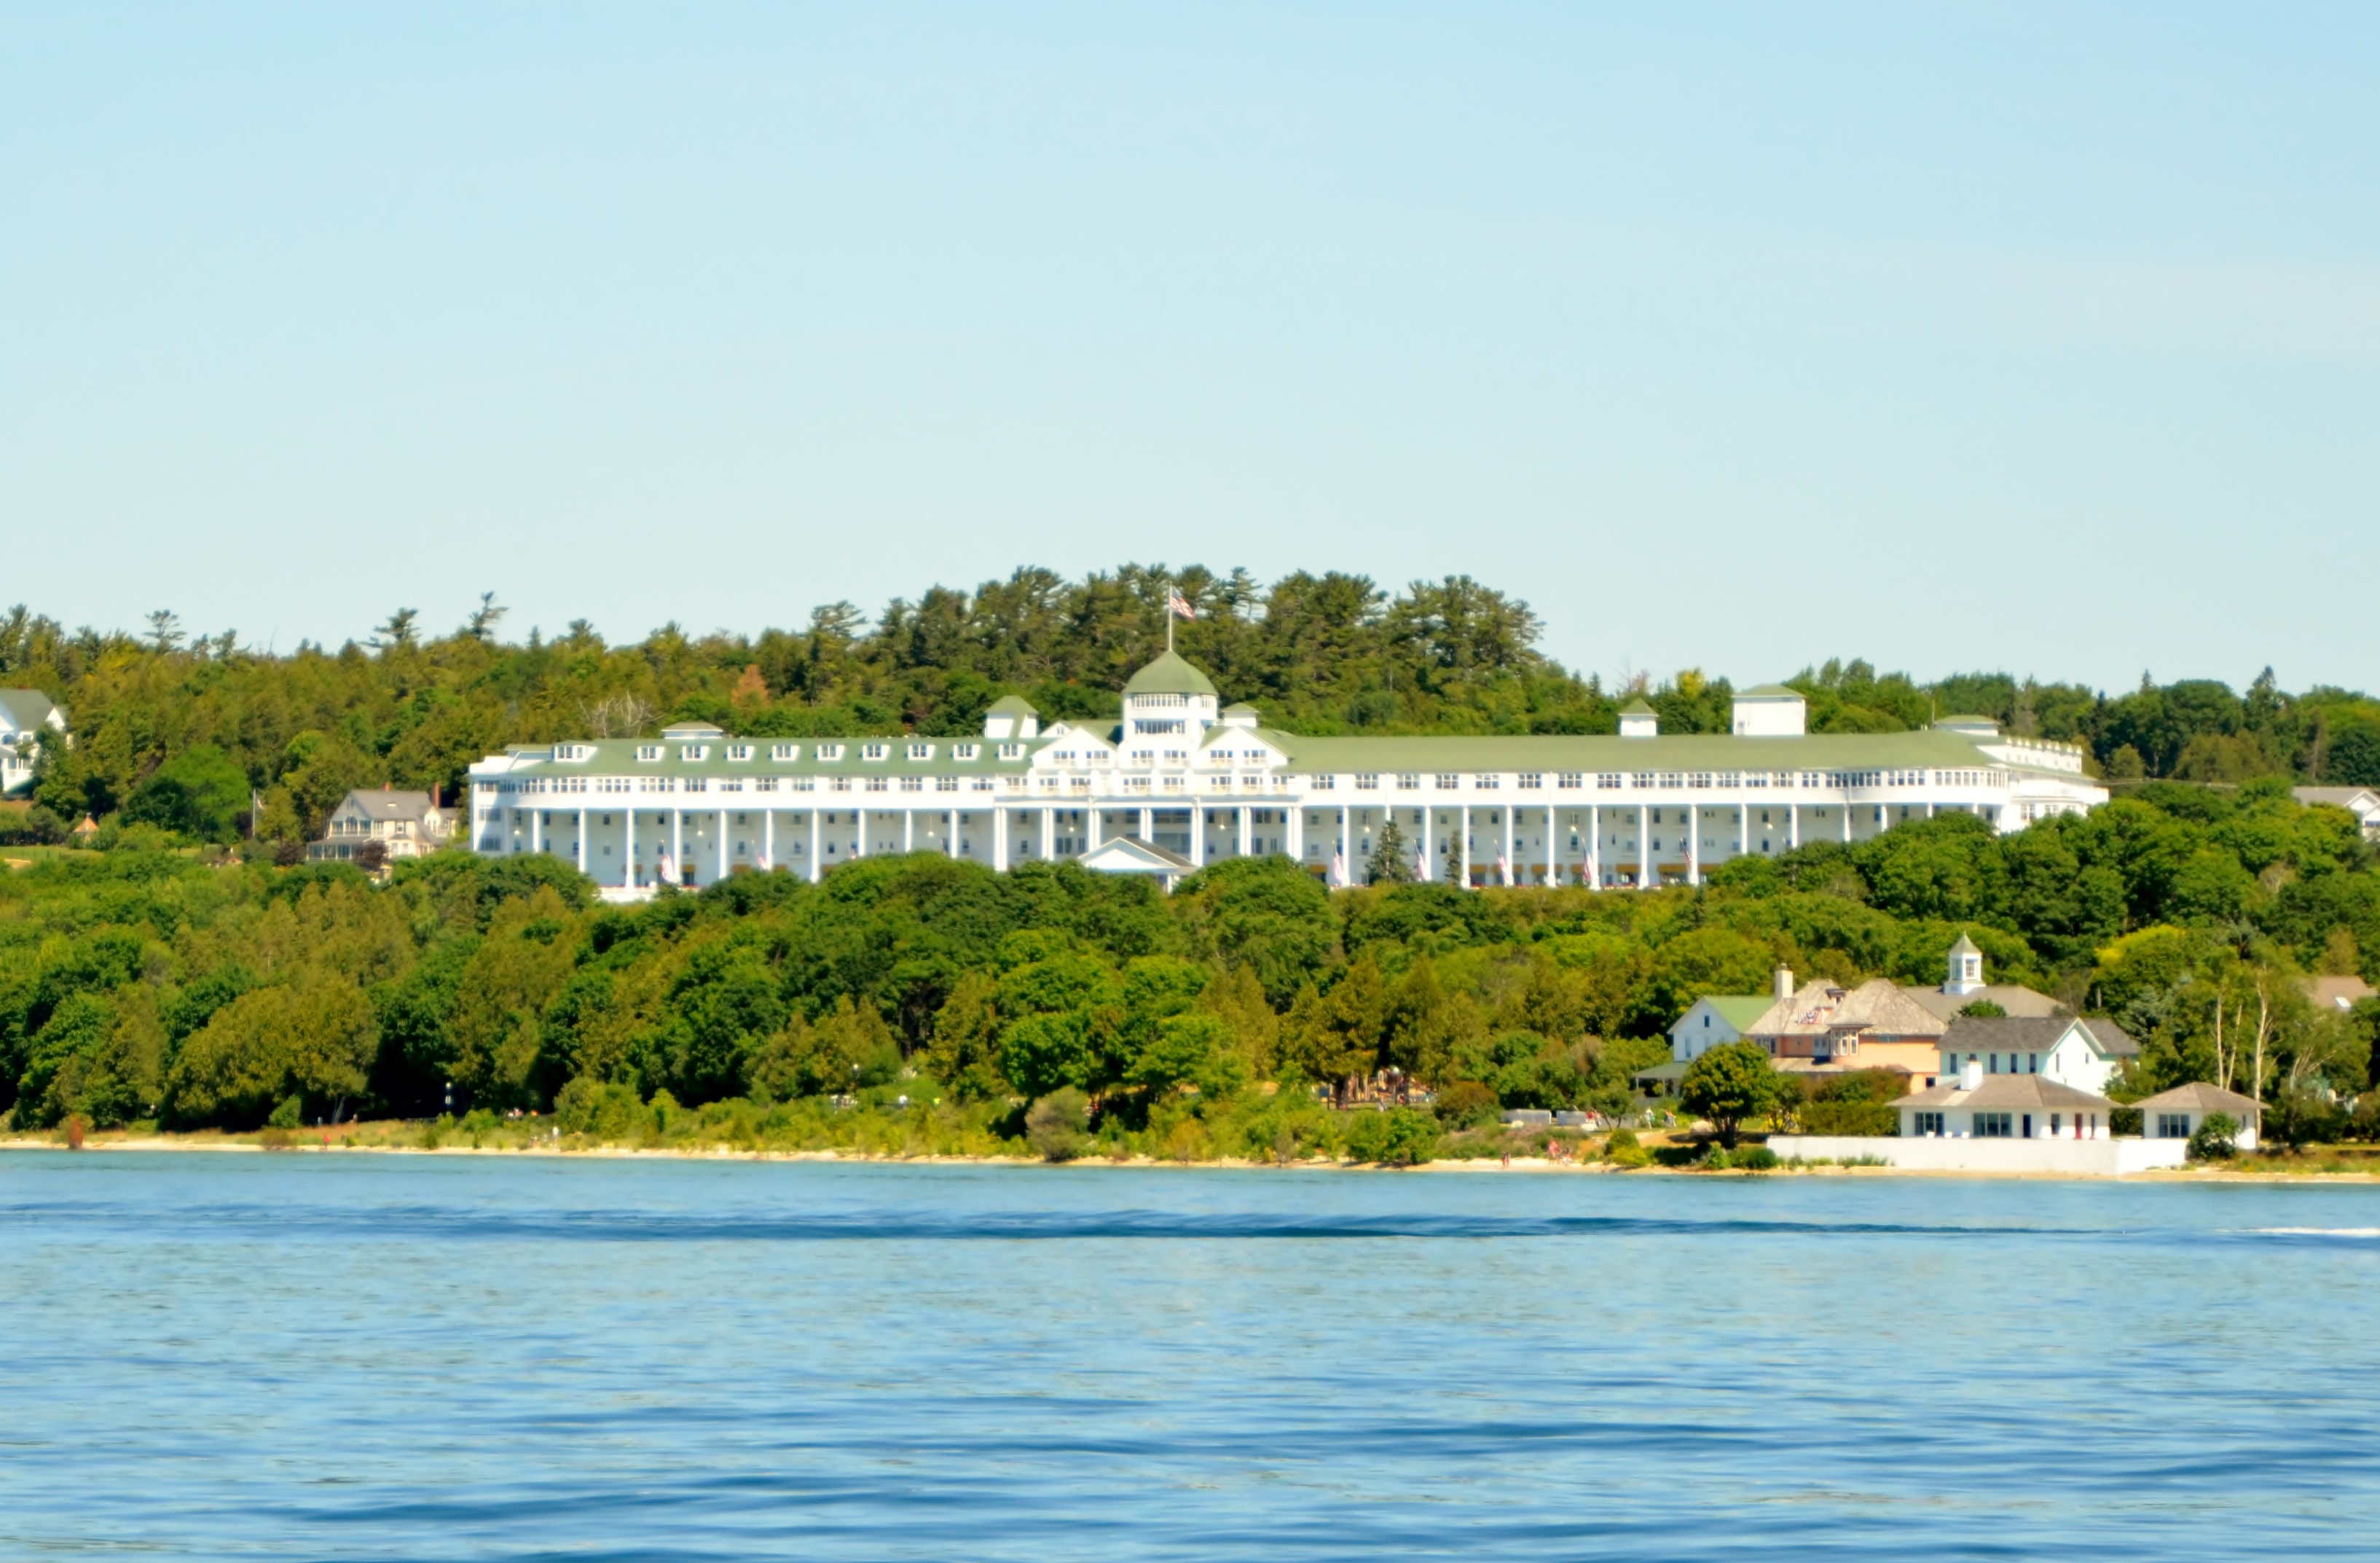 Grand Hotel on Mackinac Island from the Ferry